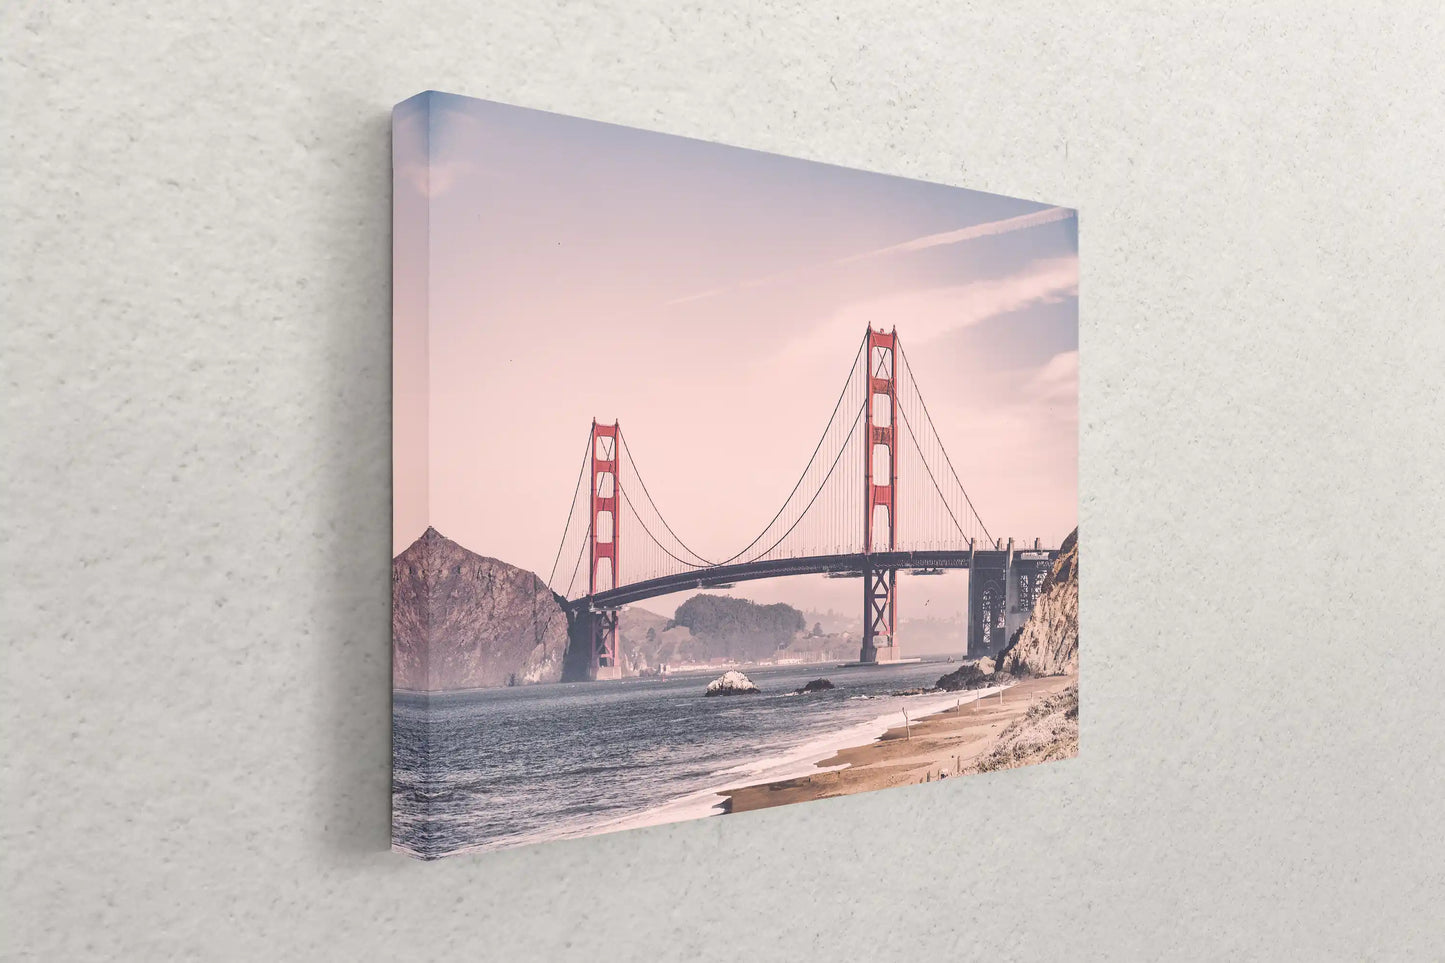 A side view of a canvas print leaning against a wall, featuring a vintage-style photograph of the Golden Gate Bridge with warm tones.